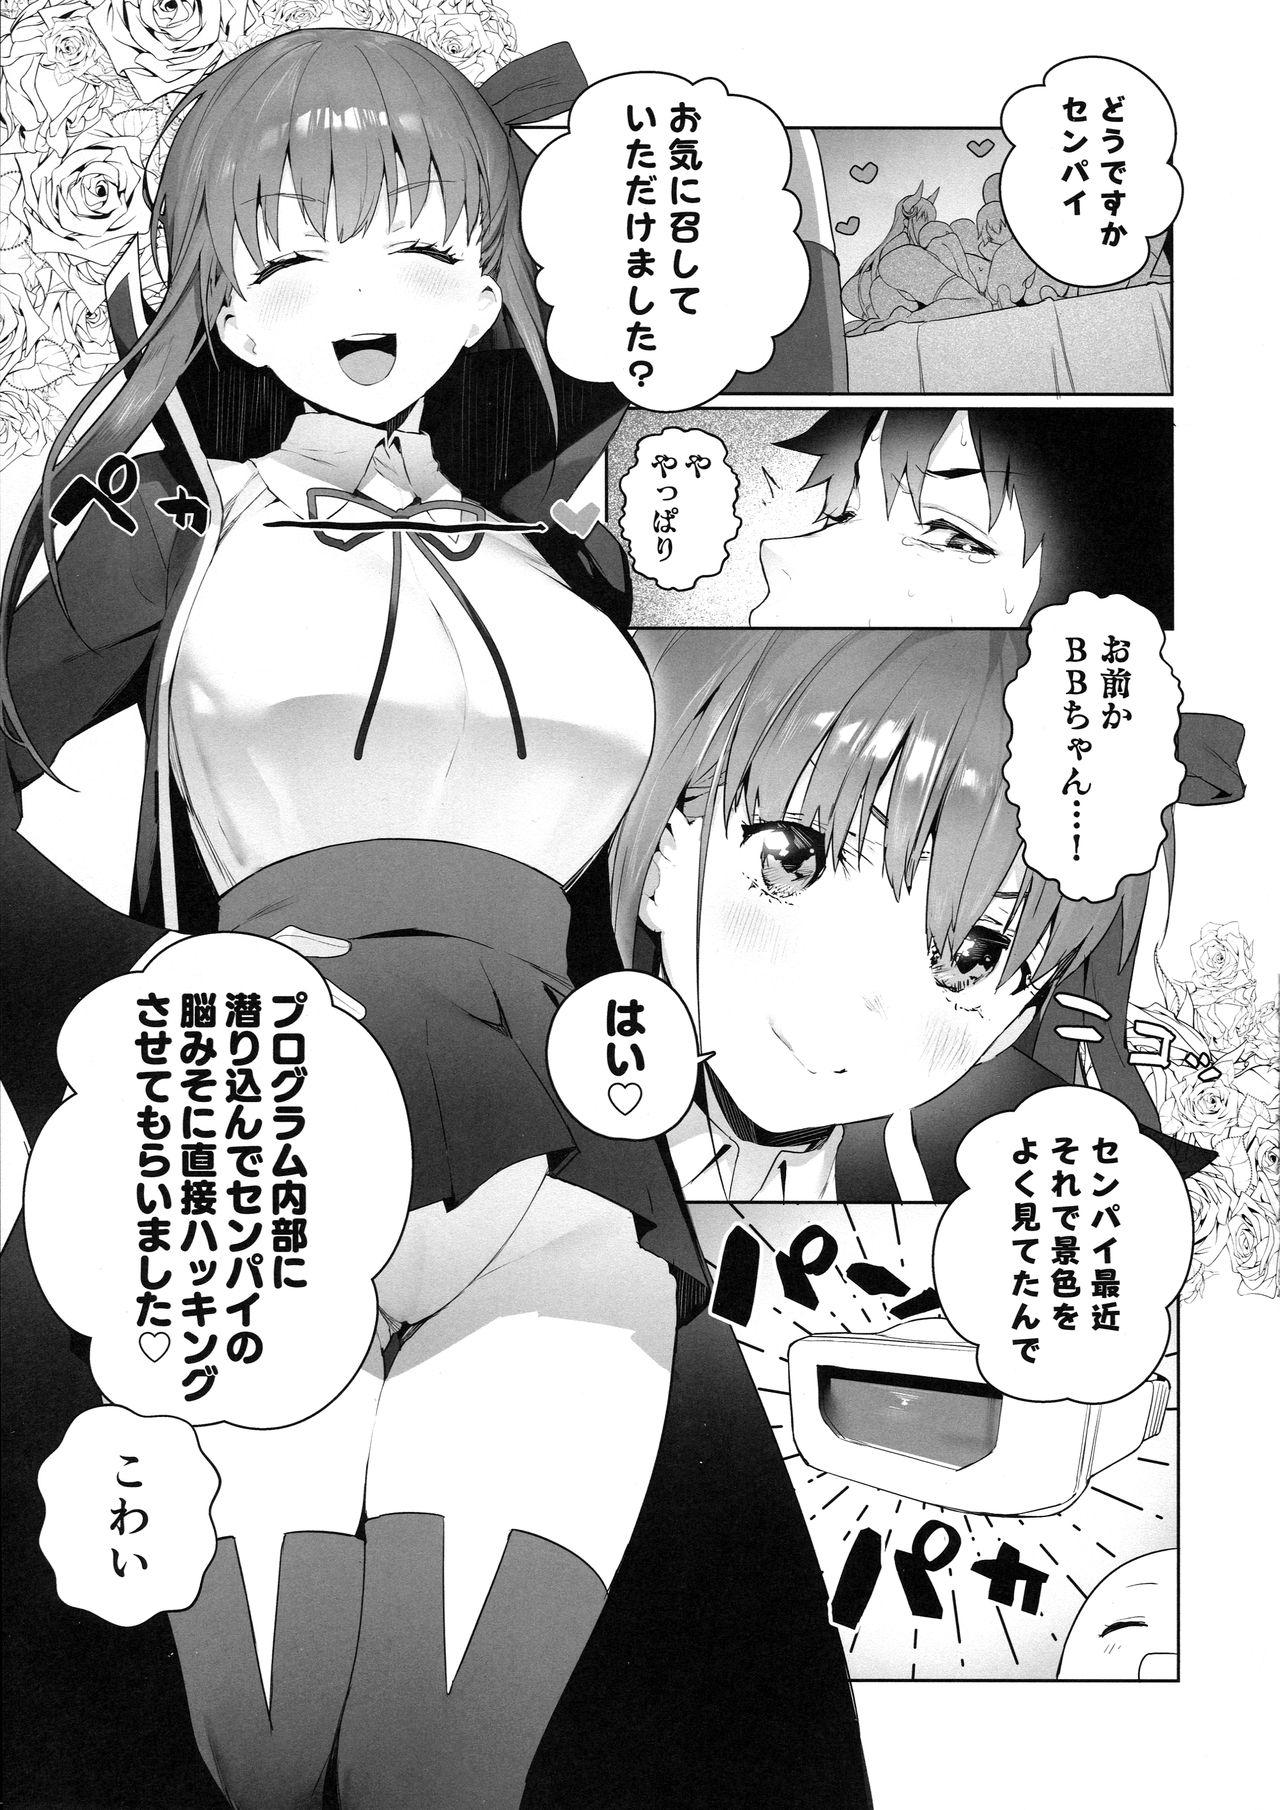 Exgf LOVELESS - Fate grand order Bottom - Page 4